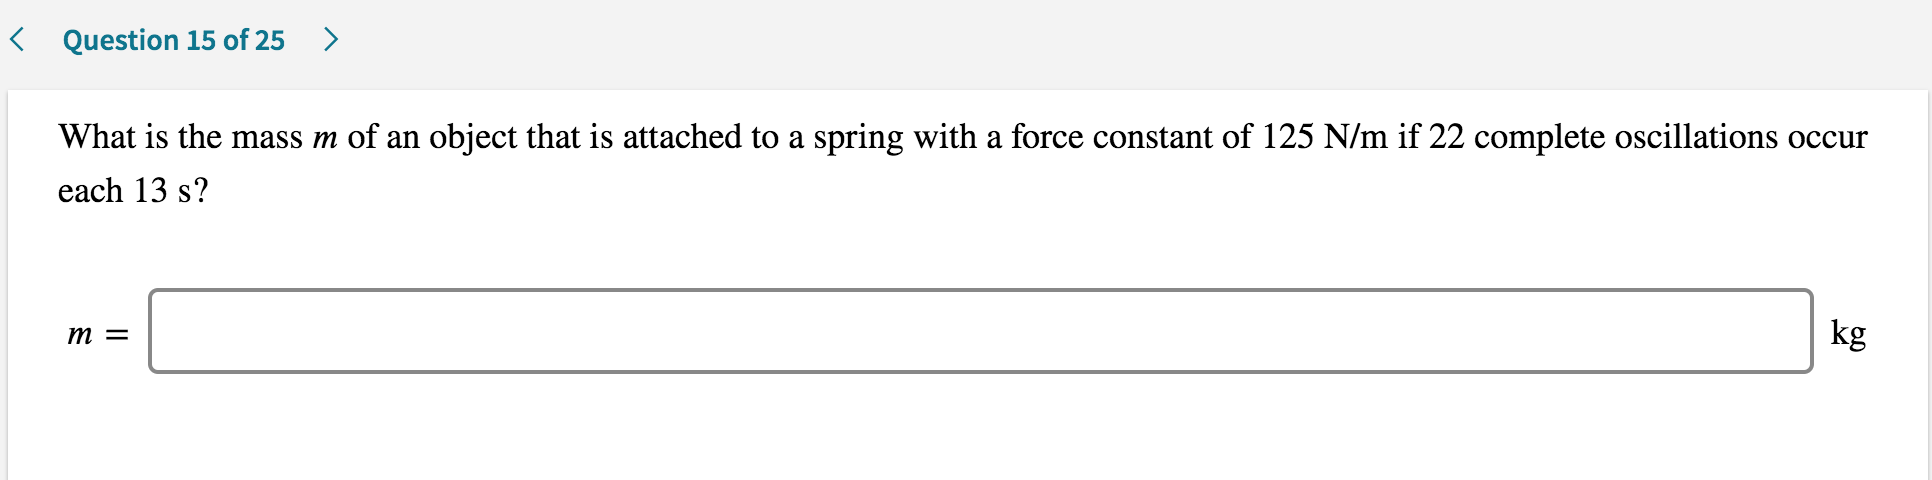 < Question 15 of 25 >
What is the mass m of an object that is attached to a spring with a force constant of 125 N/m if 22 complete oscillations occur
each 13 s?
kg
m =
